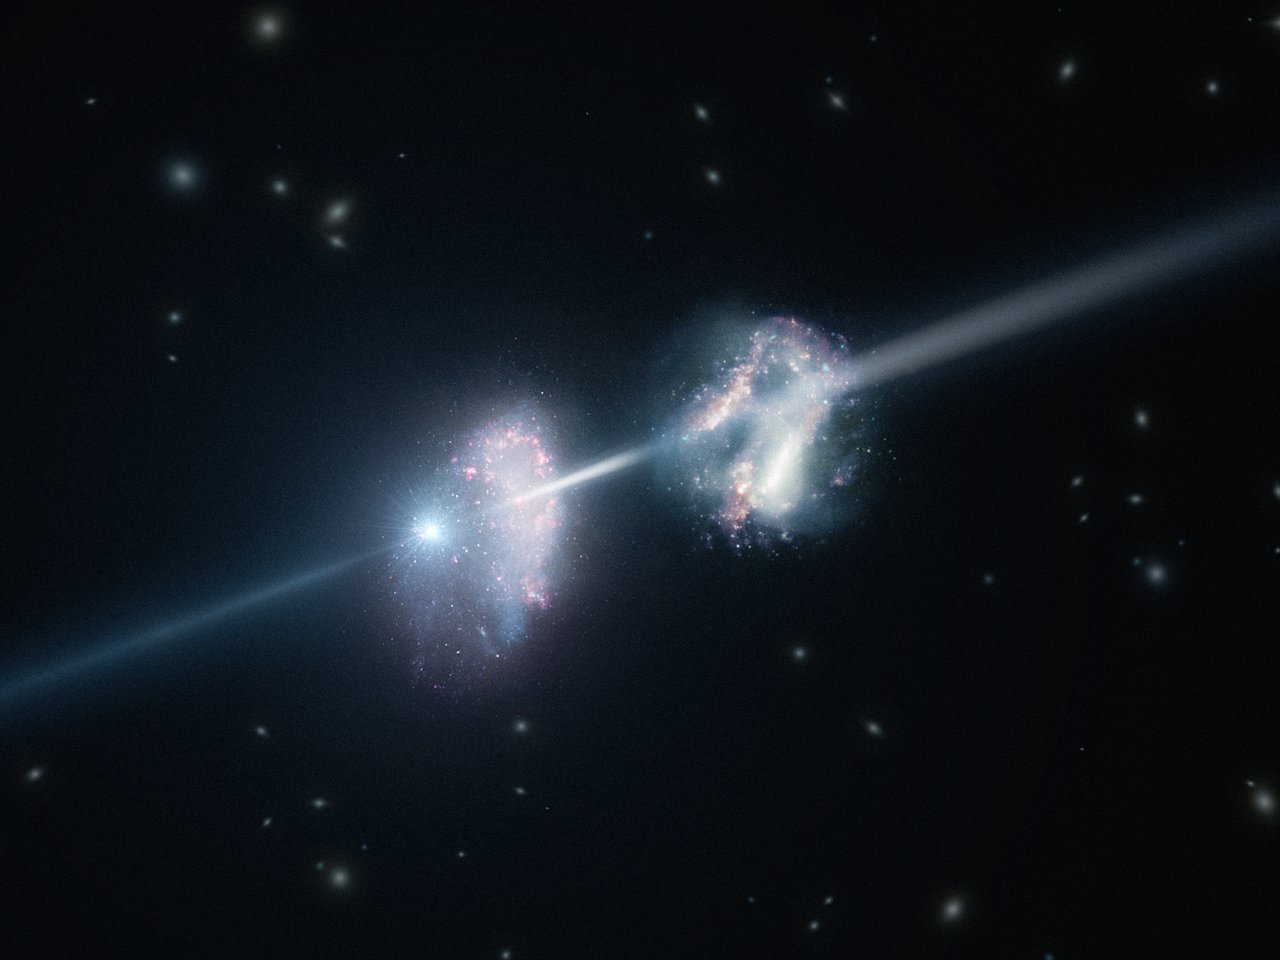 Artists impression of a gamma ray burst shining through two young